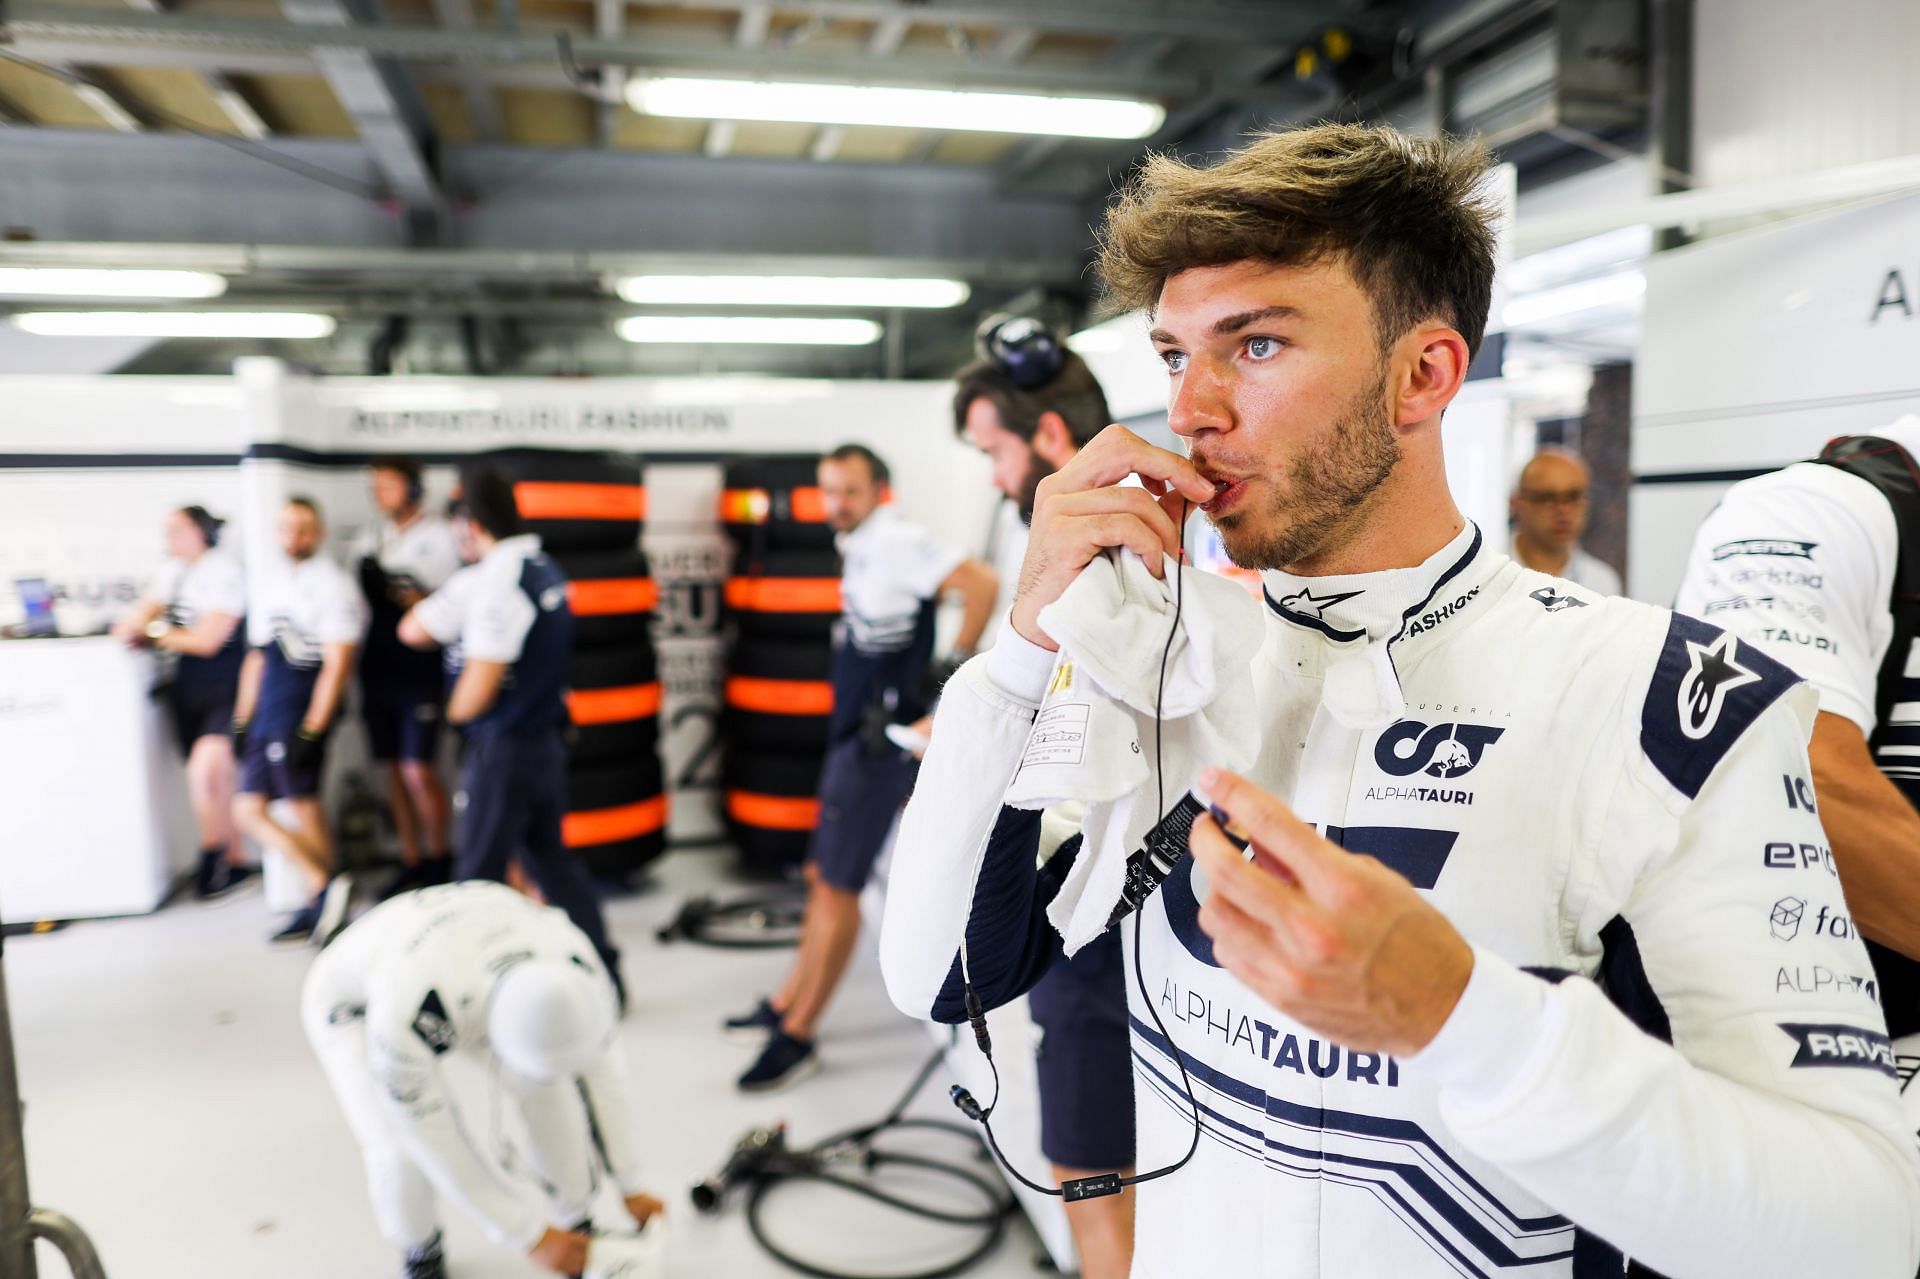 Gasly in the AlphaTauri garage during the 2022 F1 Monaco GP weekend. (Photo by Peter Fox/Getty Images)